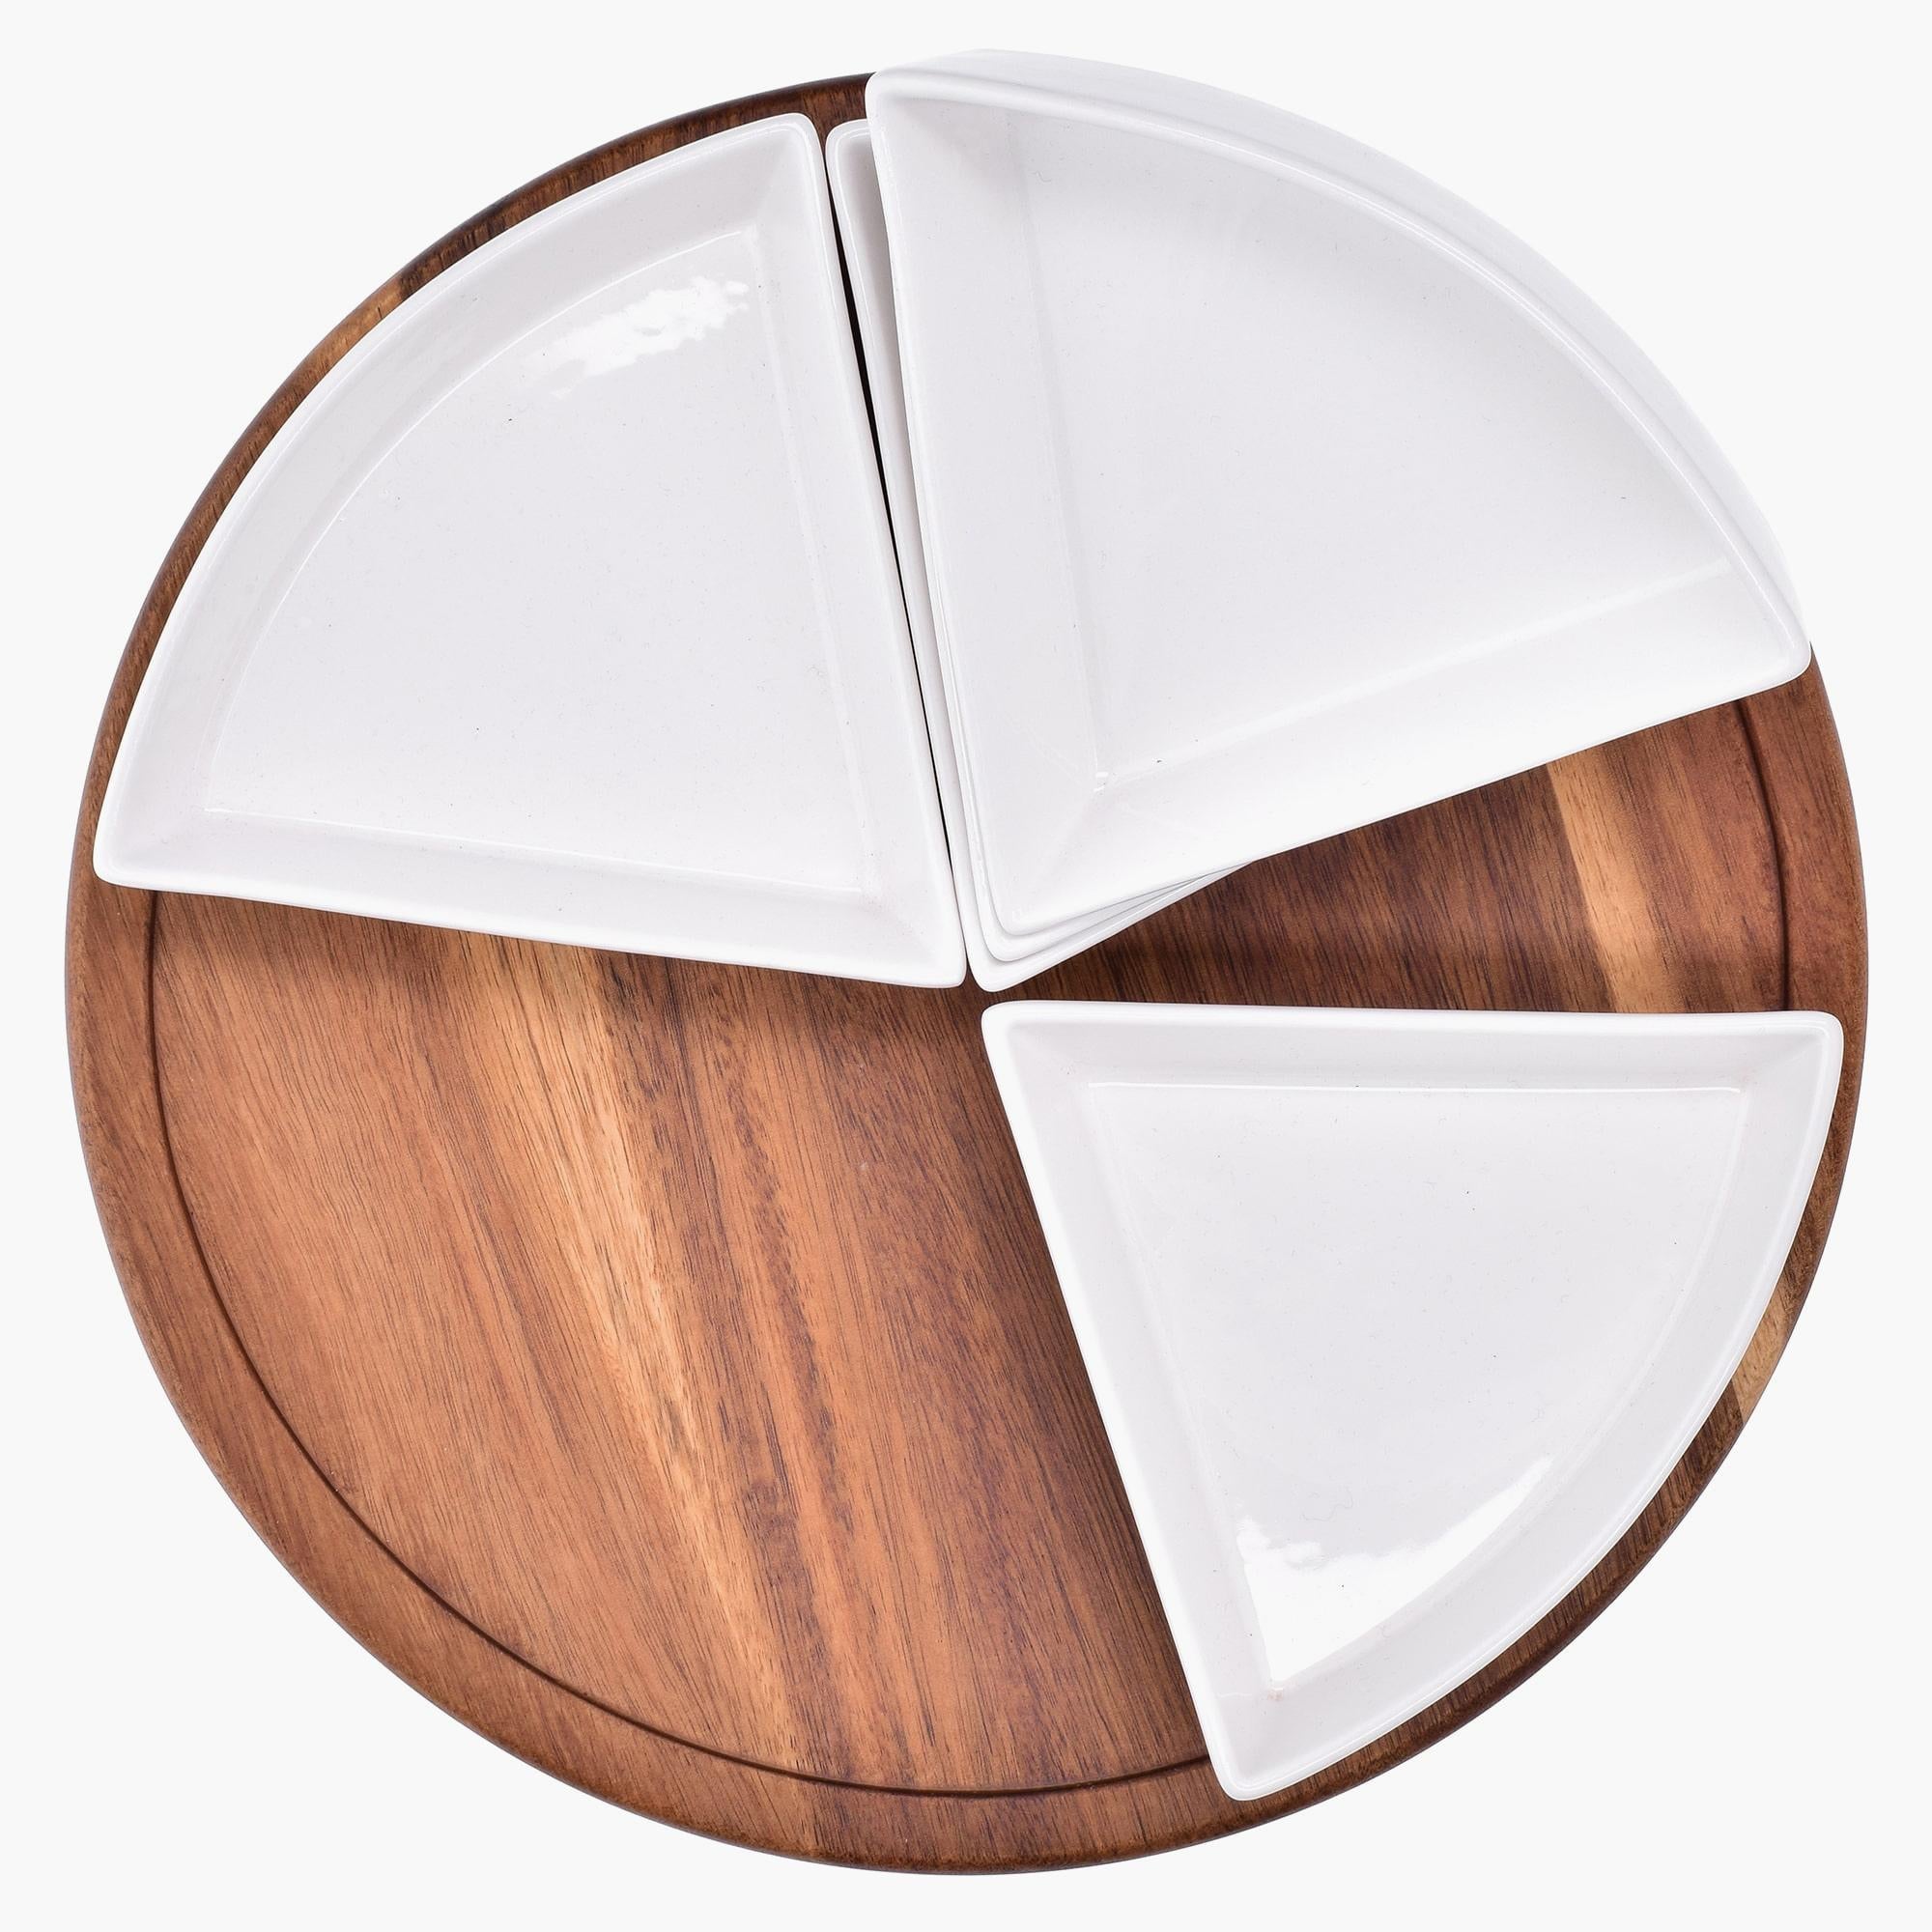 Wooden Lazy Susan Turntable with 5 Triangular Appetizer Plates